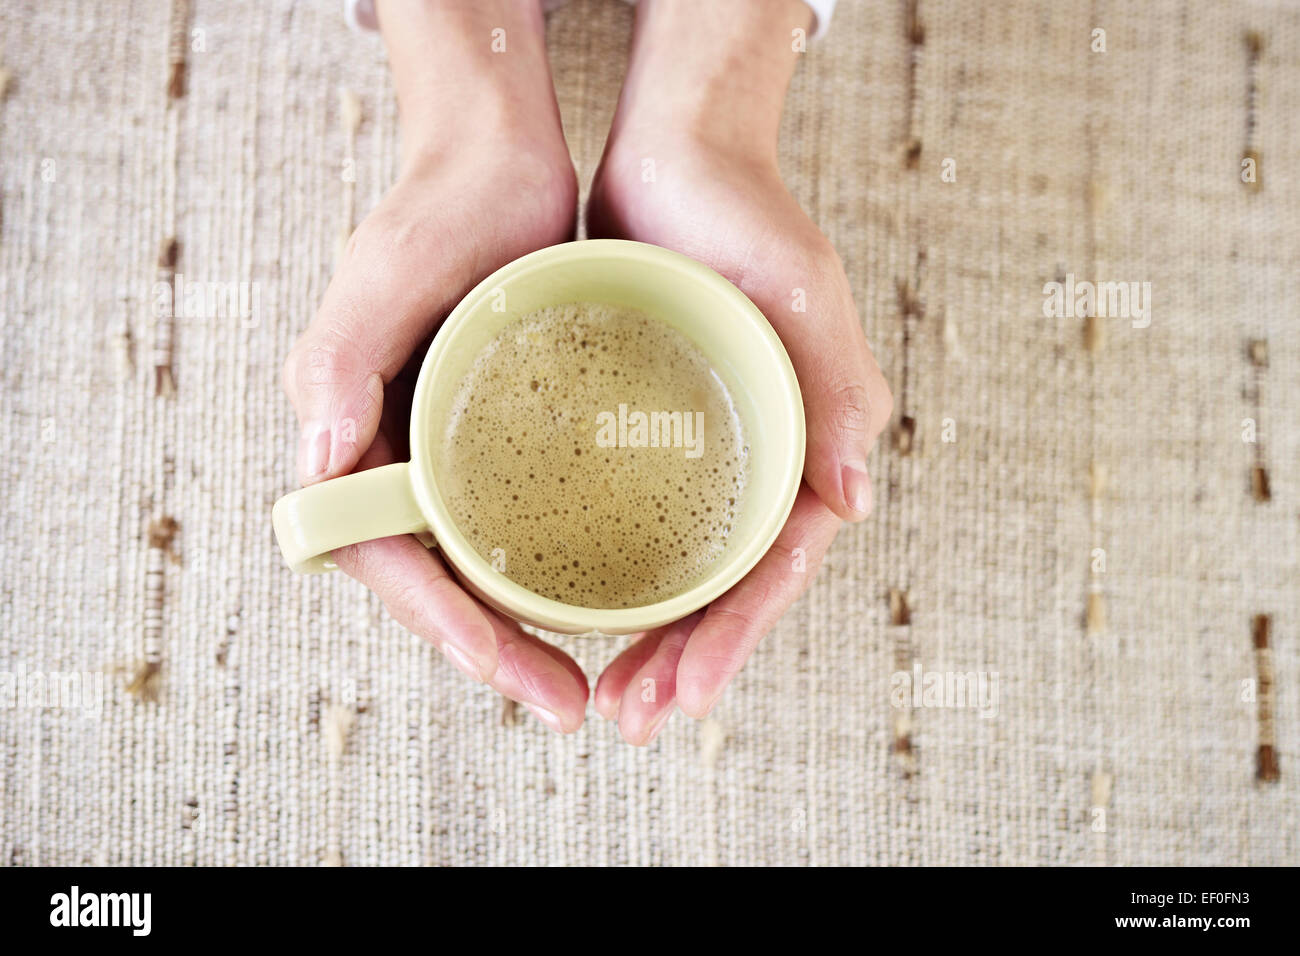 hands holding coffee cup Stock Photo